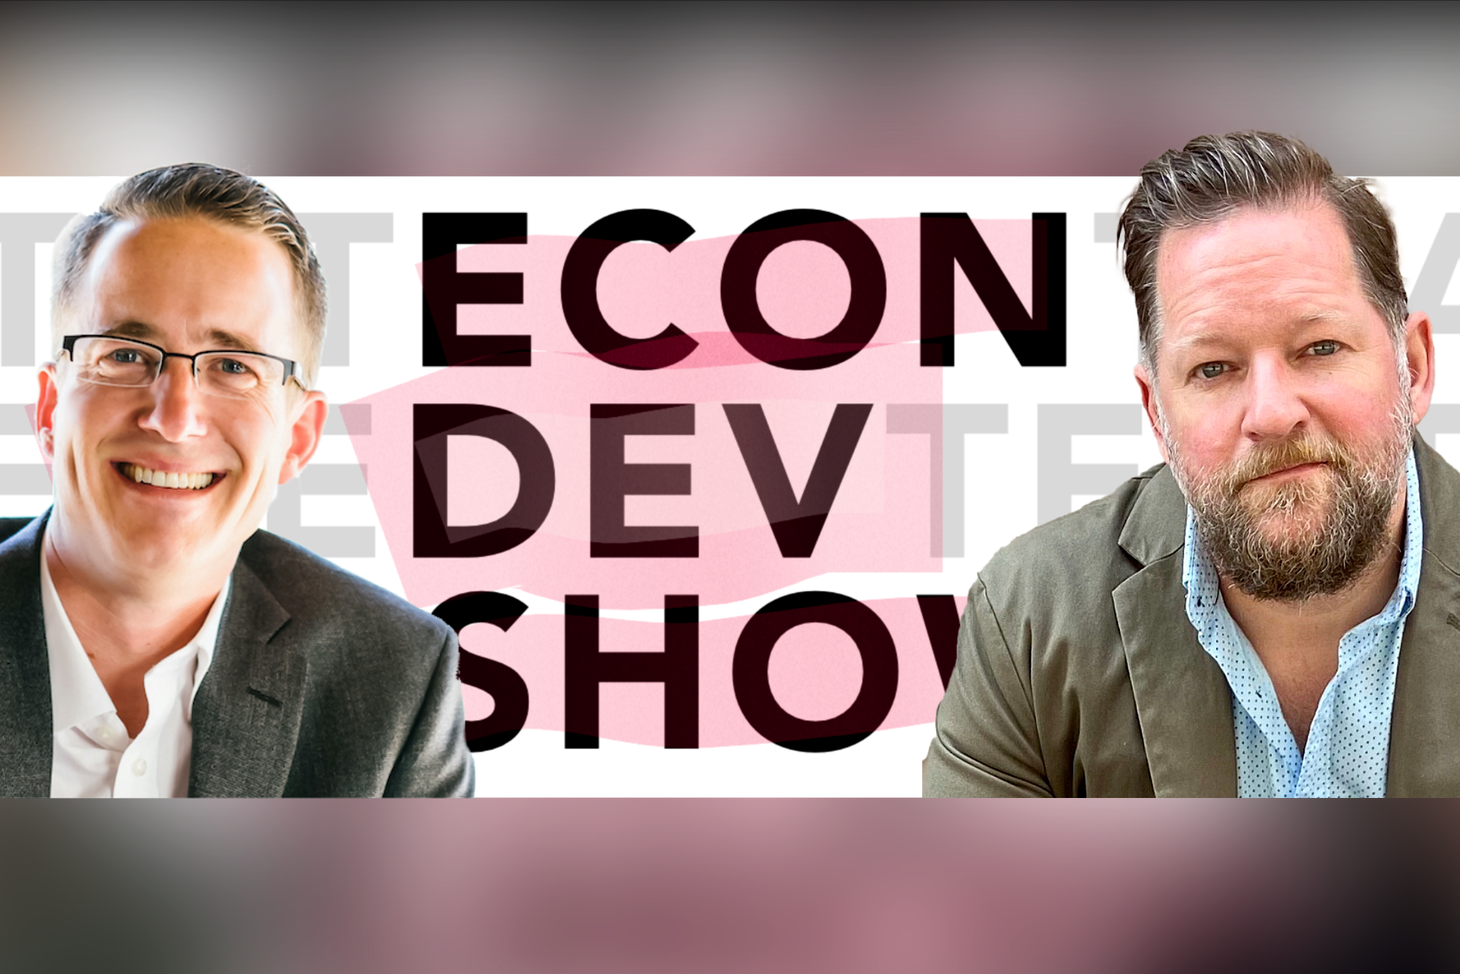 Podcast Episode # 119 - From Sick Cities to Thriving Communities with Jeff Siegler